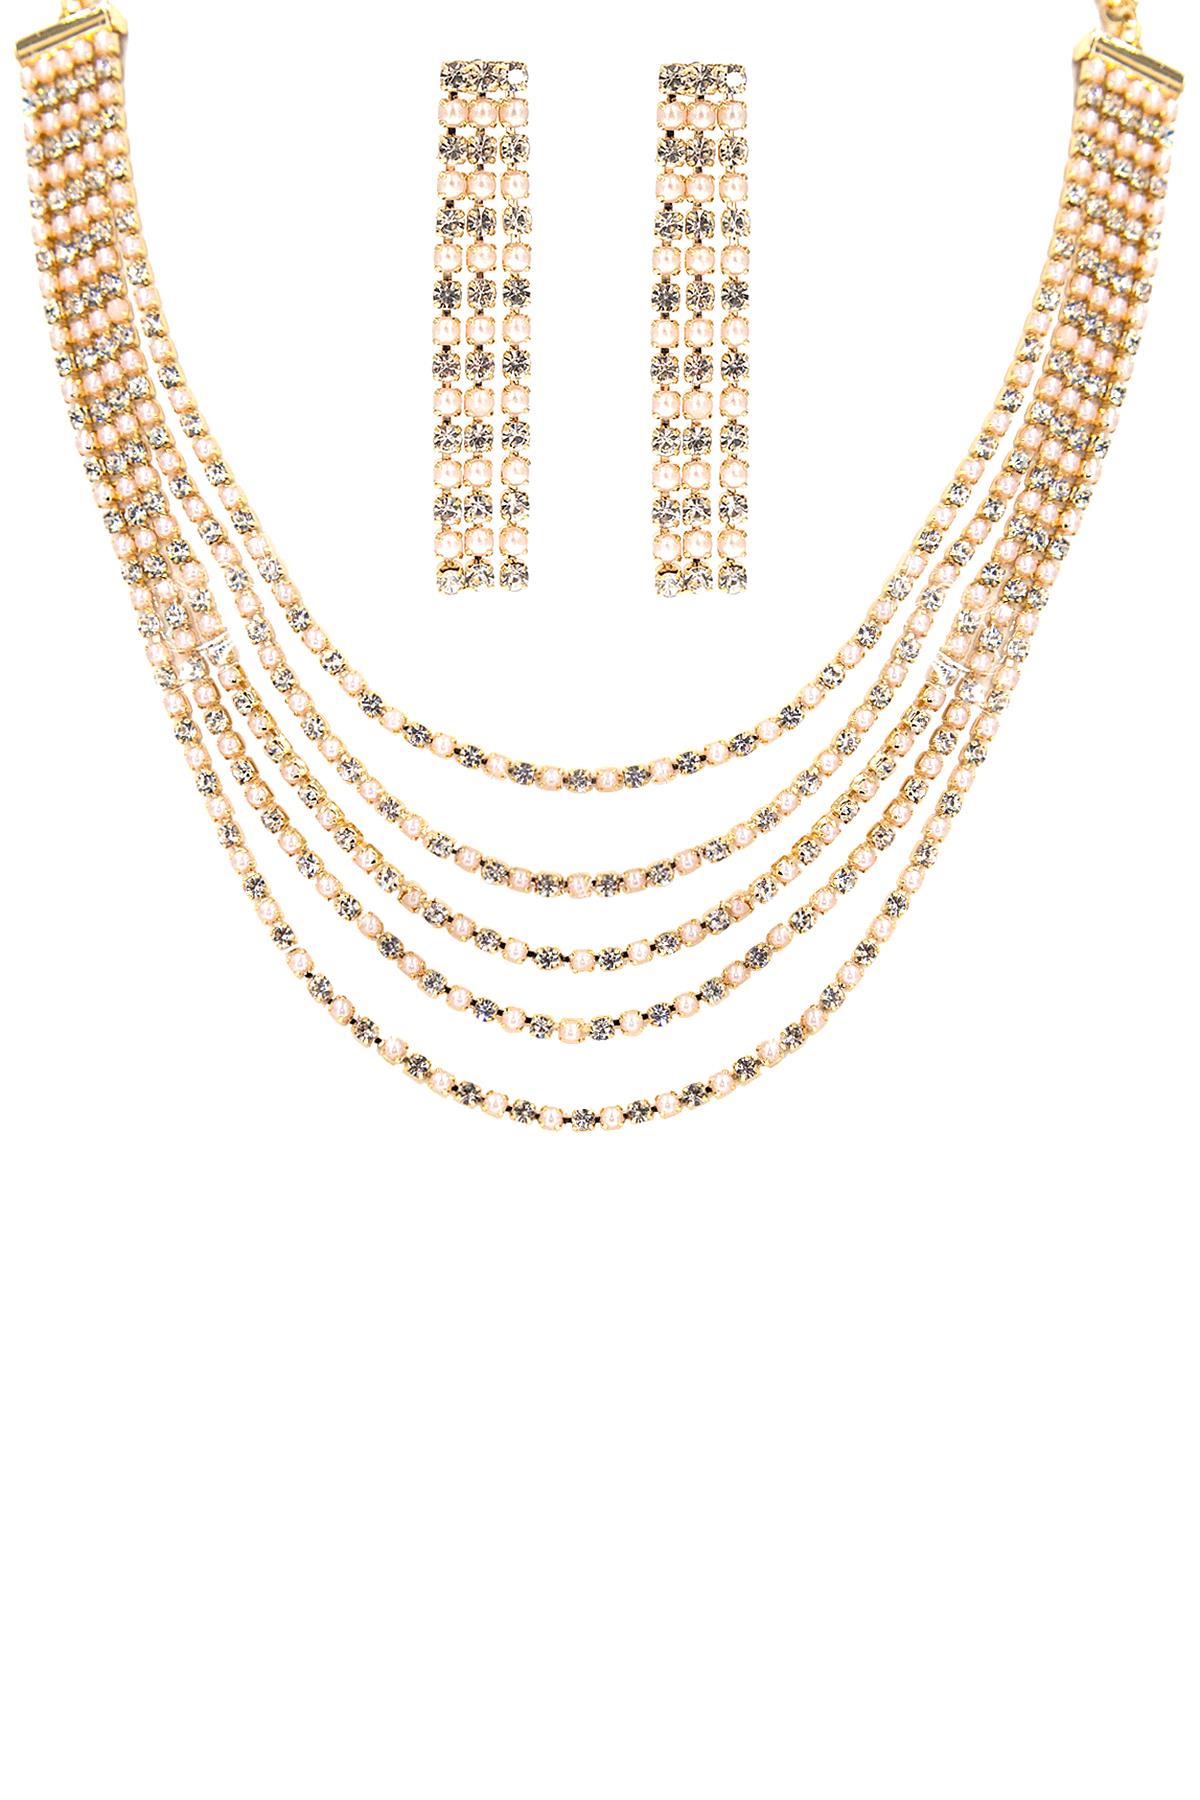 RHINESTONE PEARL 5 LINE NECKLACE AND EARRING SET